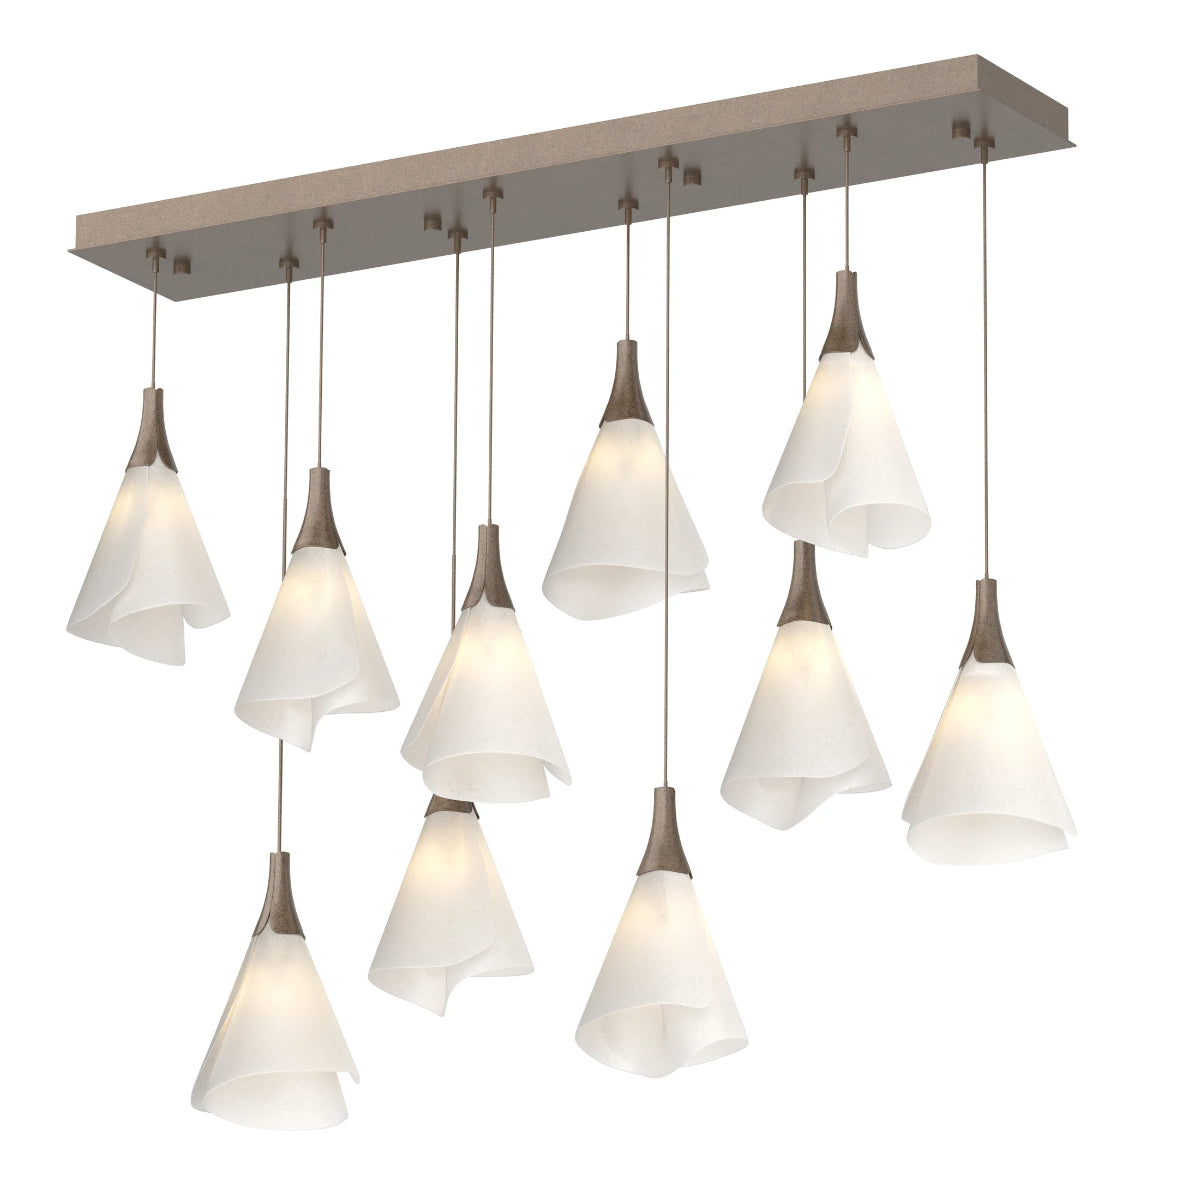 Mobius 46 in. 10 Lights Linear Pendant Light with Standard Height